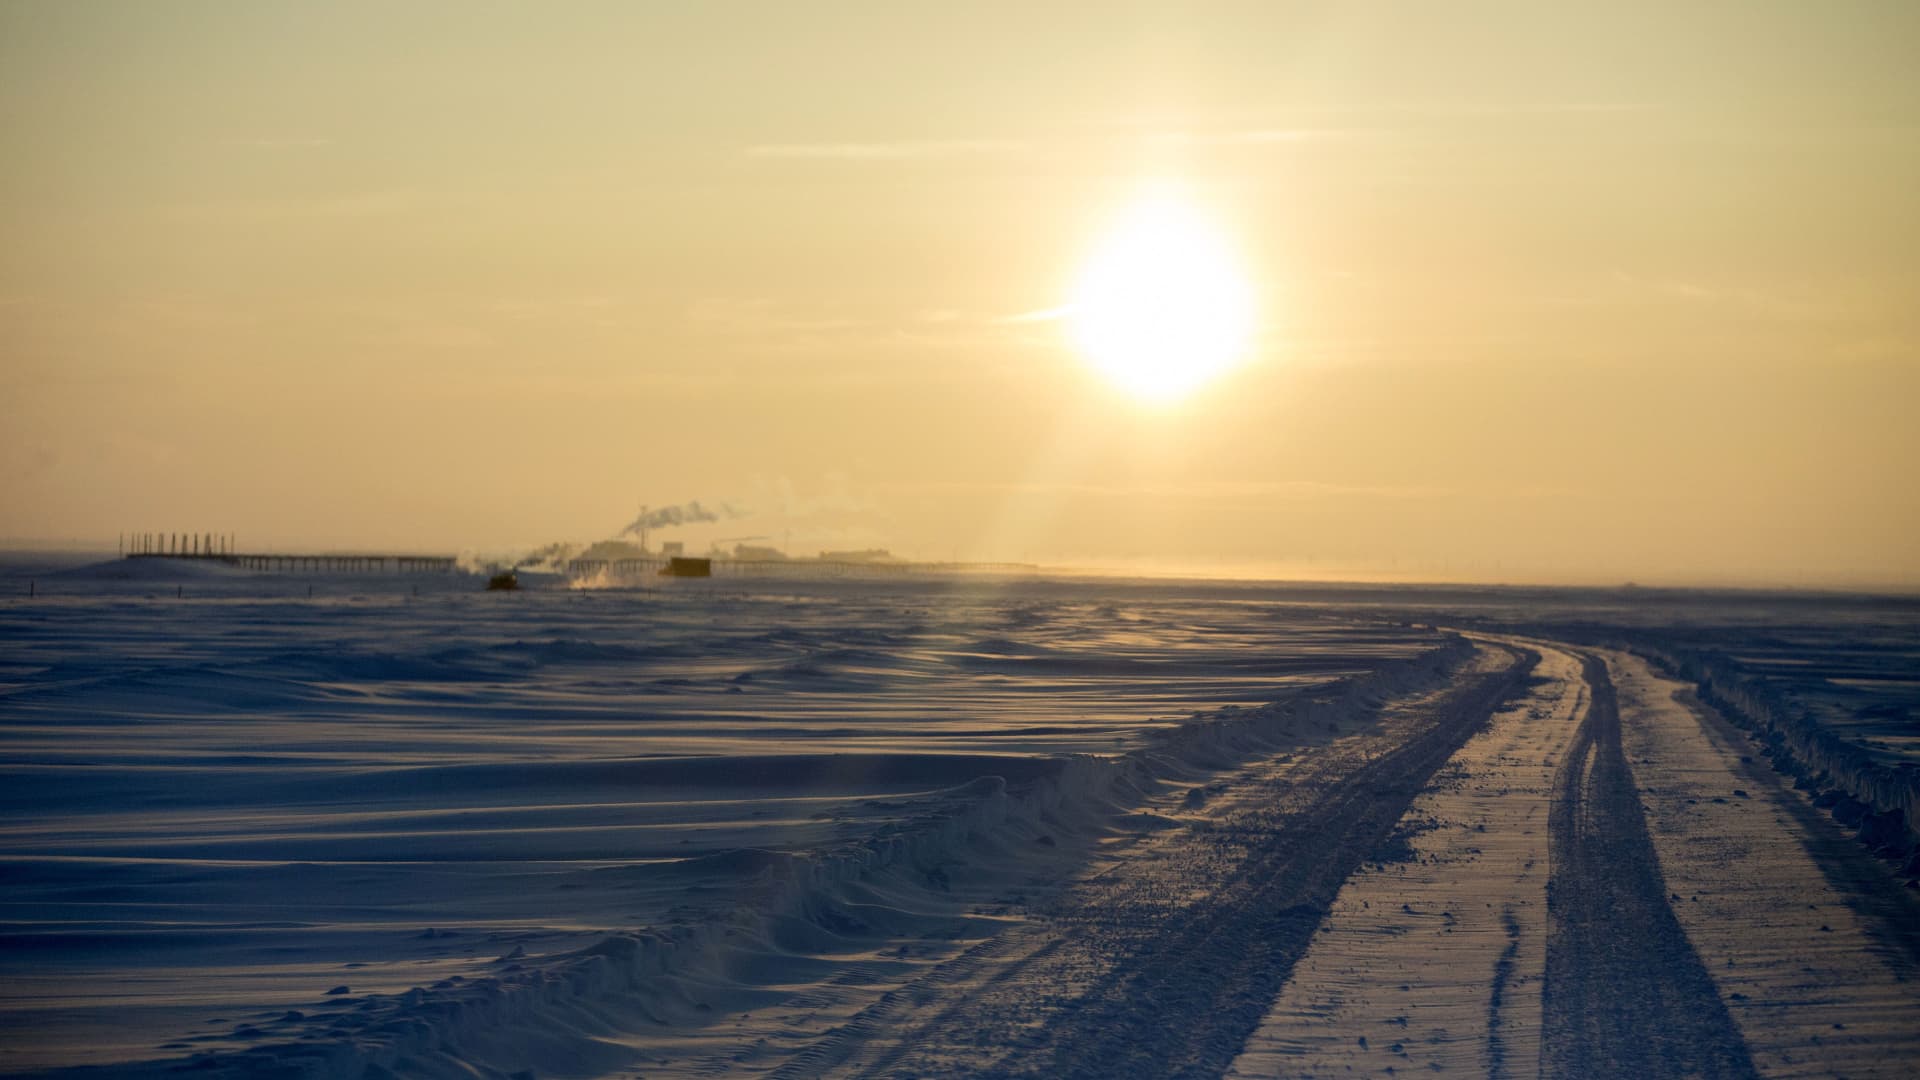 The sun rises over an ice road on the frozen Beaufort Sea near the Caelus Energy LLC Oooguruk Development Project in Harrison Bay, Alaska, U.S., on Friday, Feb. 17, 2017. Four decades after the Trans Alaska Pipeline System went live, transforming the North Slope into a modern-day Klondike, many Alaskans fear the best days have passed. Photographer: Daniel Acker/Bloomberg via Getty Images